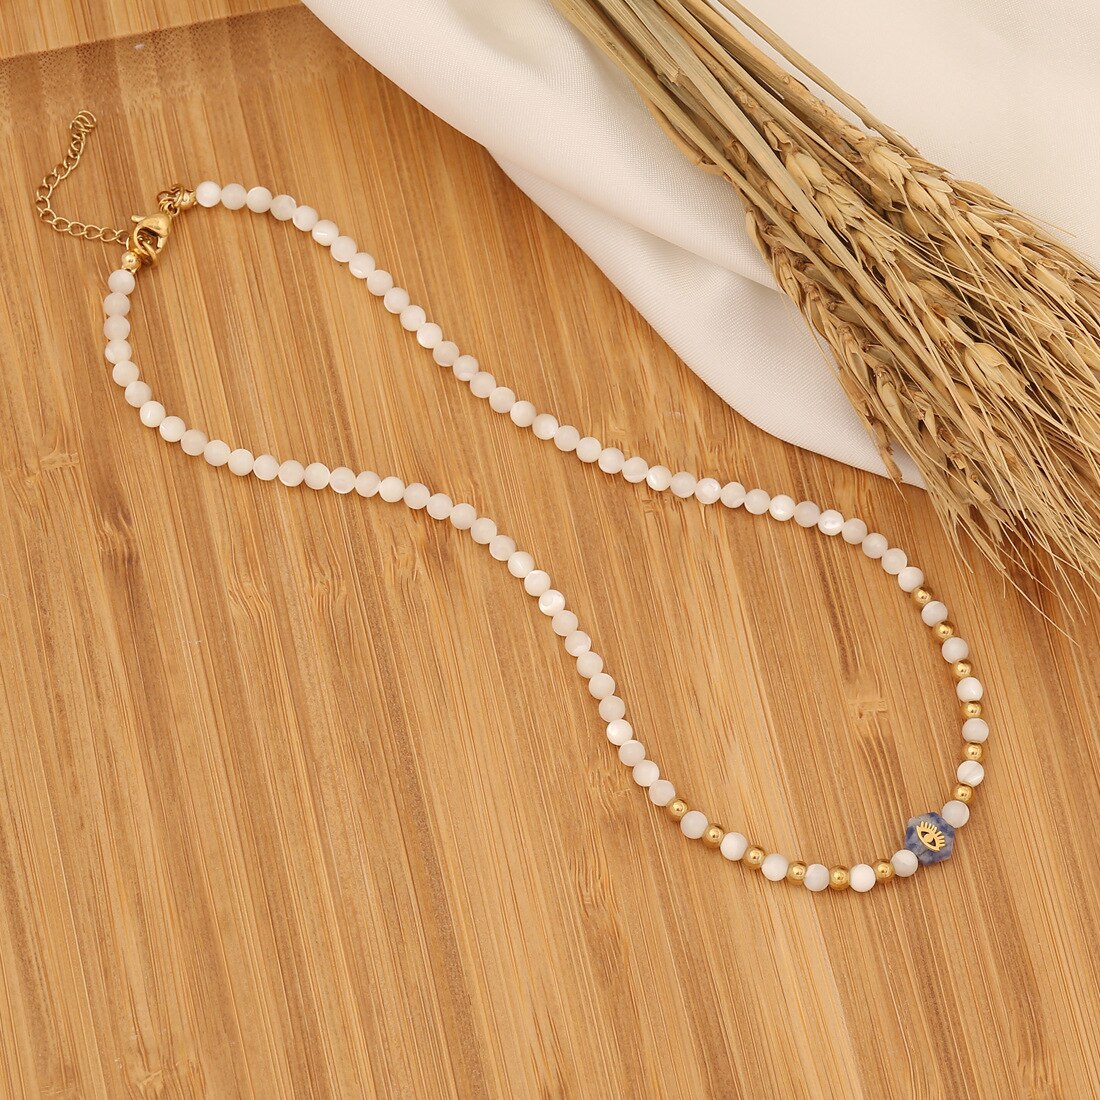 Shell Beads Natural Stone Beads Necklace Fashion Stainless Steel Necklace For Women - Charlie Dolly